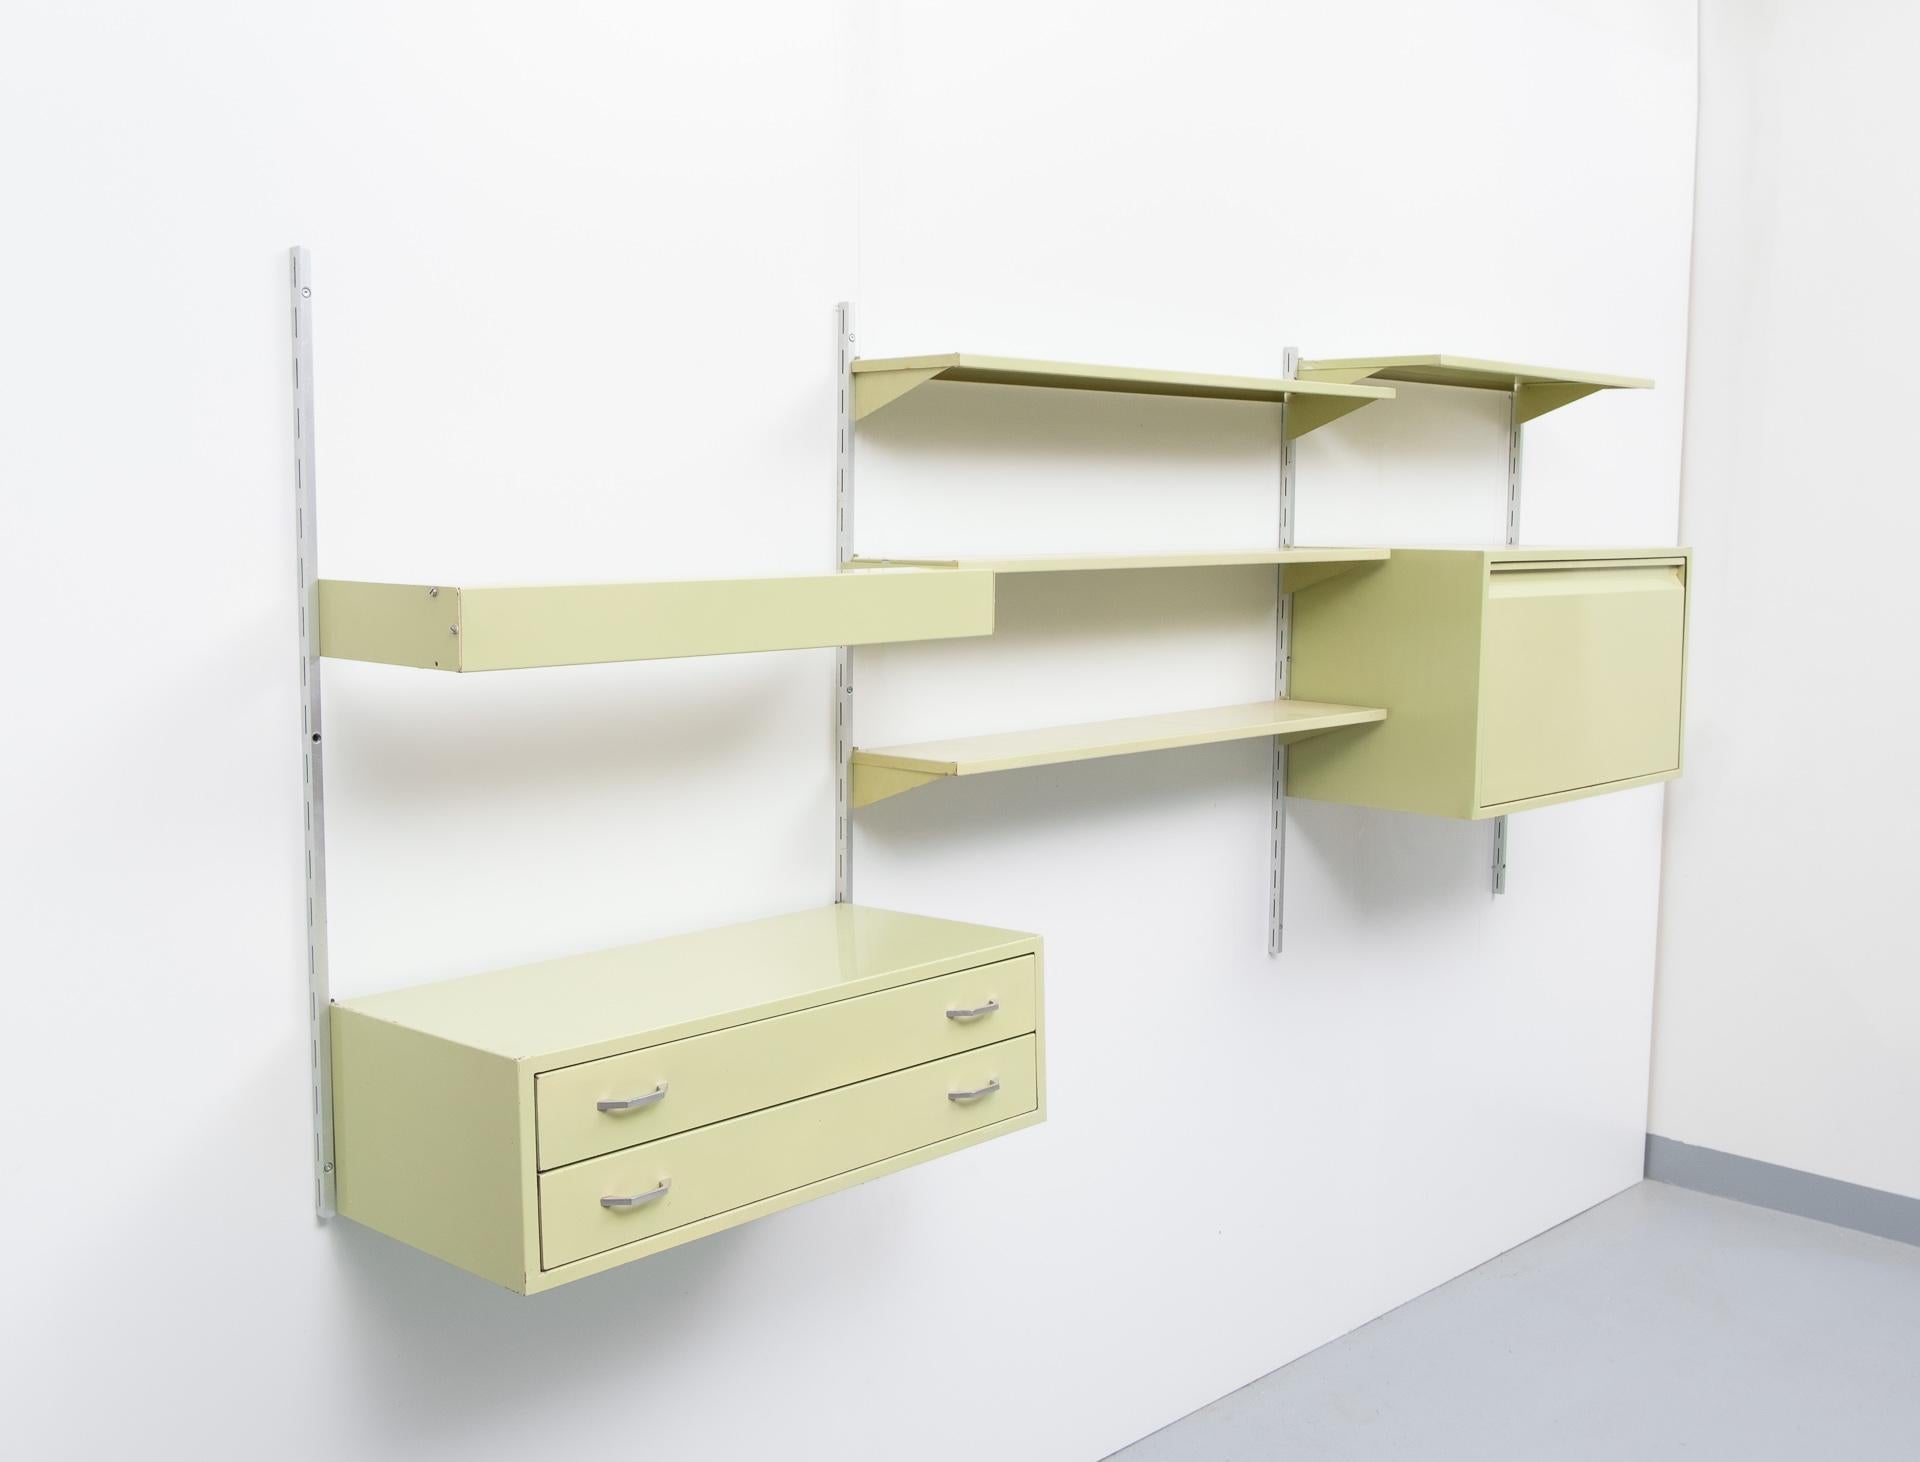 Tjerk Reijenga serie Combinare manufactured Pilastro, Holland, 1950s. Very rare set.
7 aluminum rails, two cabinets, one-light bare, and four shelves. In a typical 1950s green color.
   